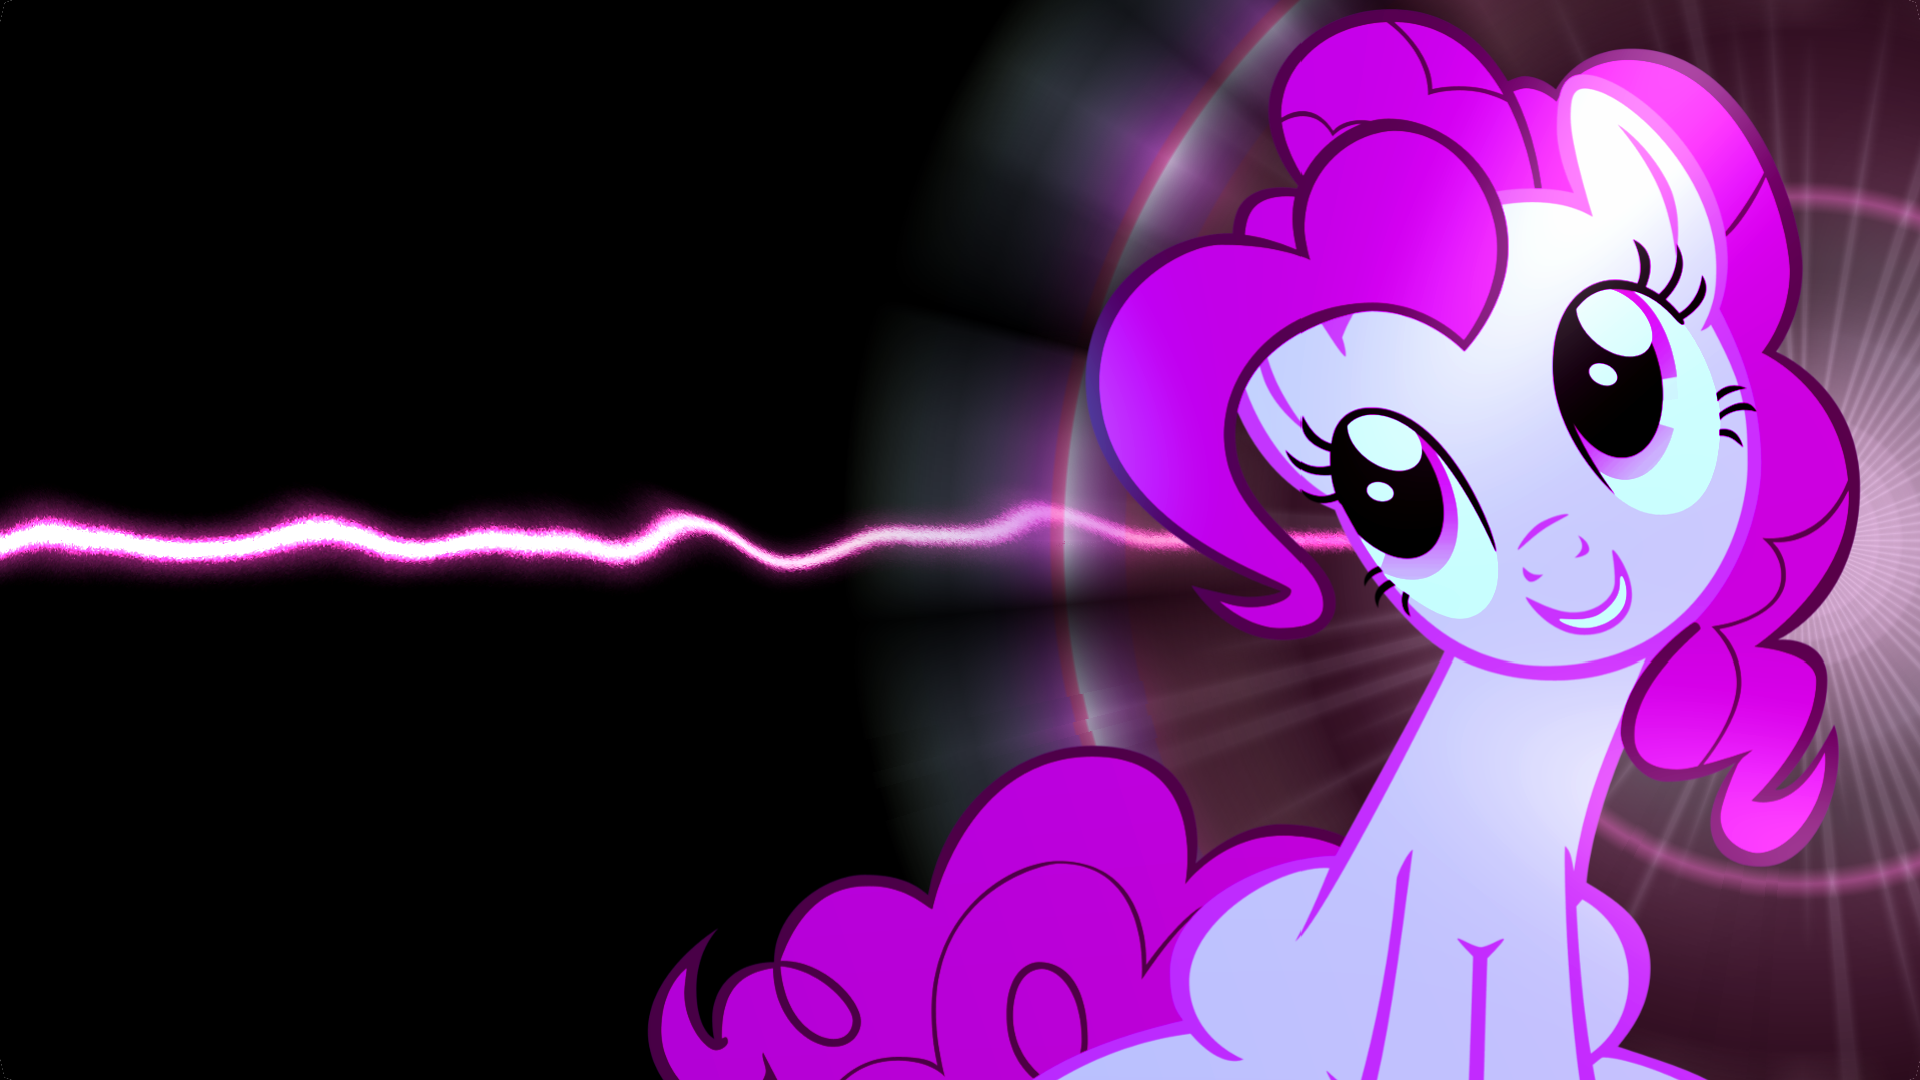 Shiny-shiny pretty lights wallpaper pack. by AtomicGreymon and Clueless313